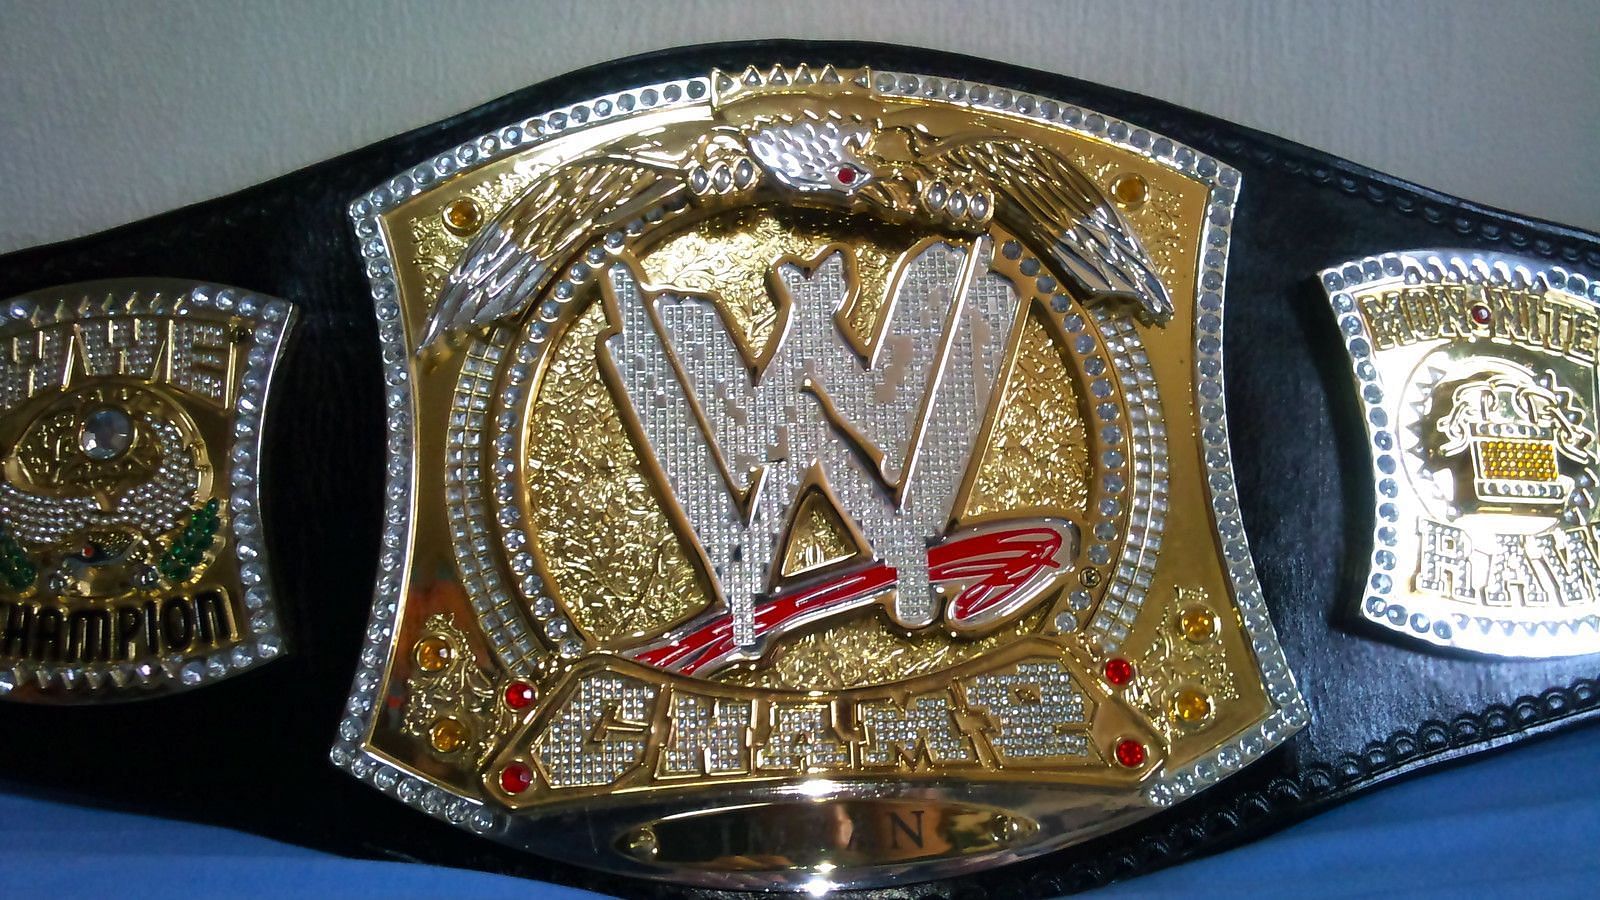 WWE Championship is one of the top prizes of the promotion